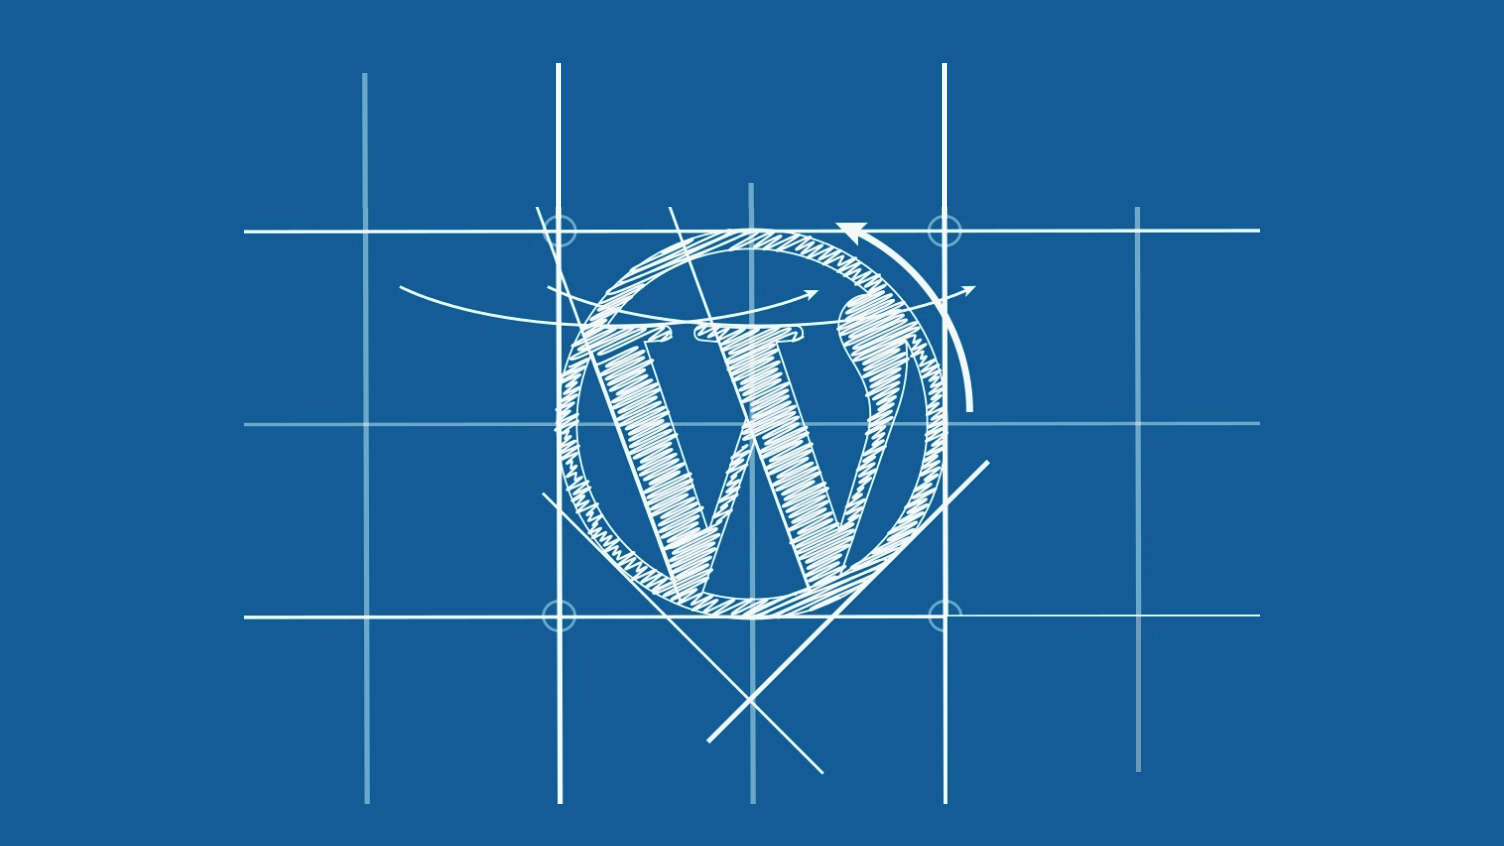 Building a website from scratch with WordPress